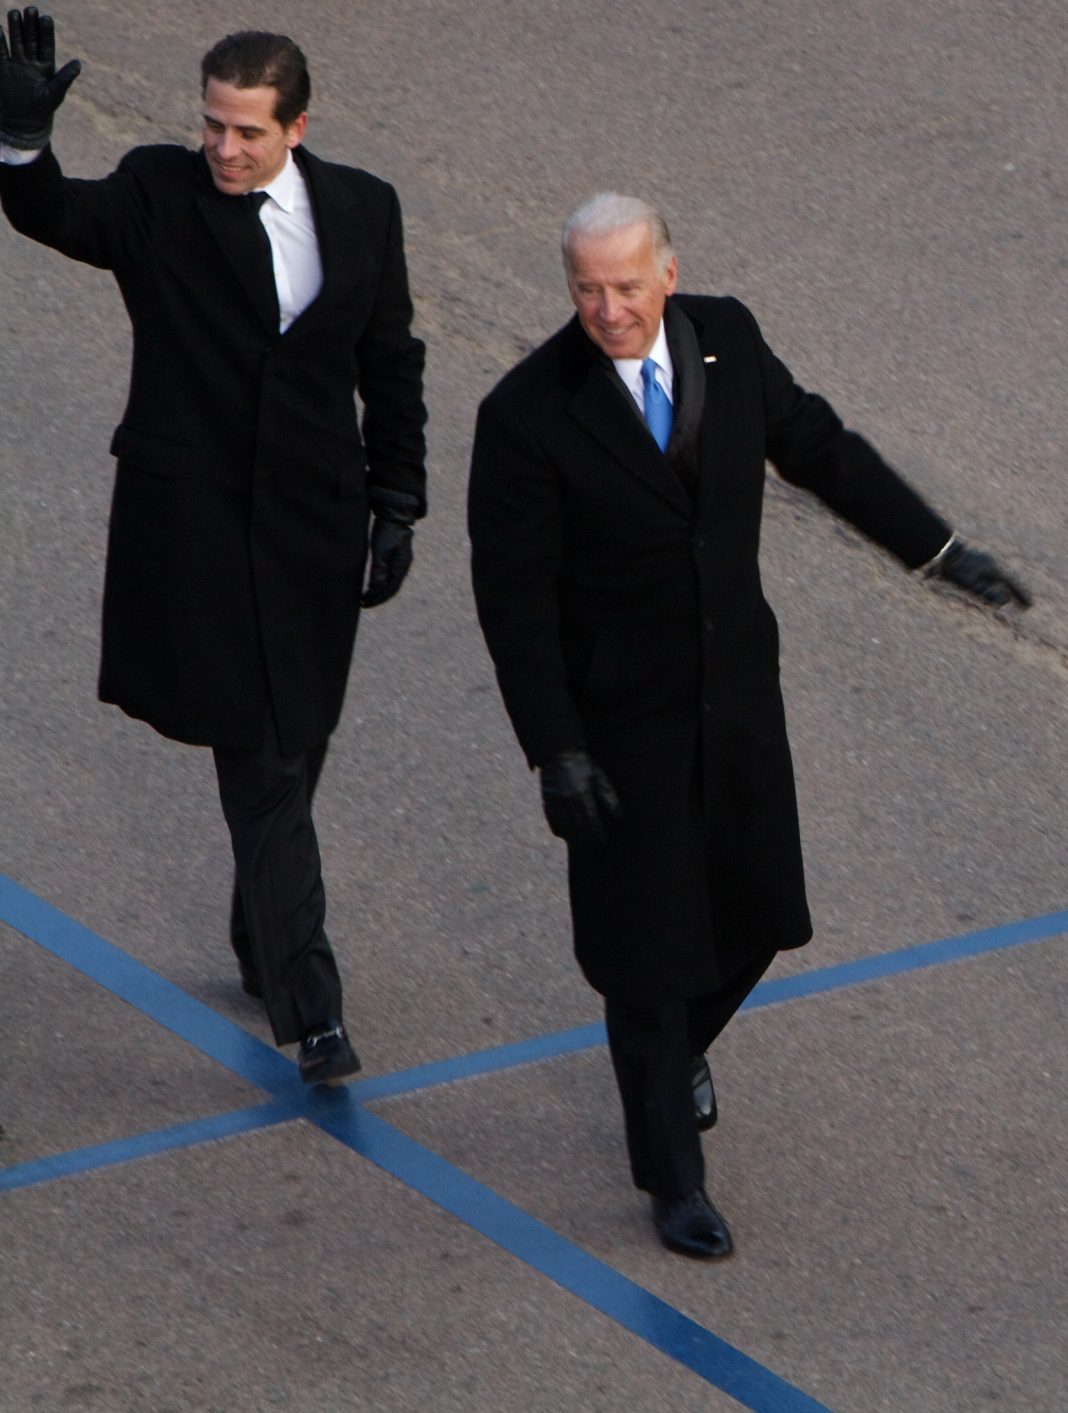 Hunter Biden Convicted of Felony Charges Related to Gun Purchase and Drug Use